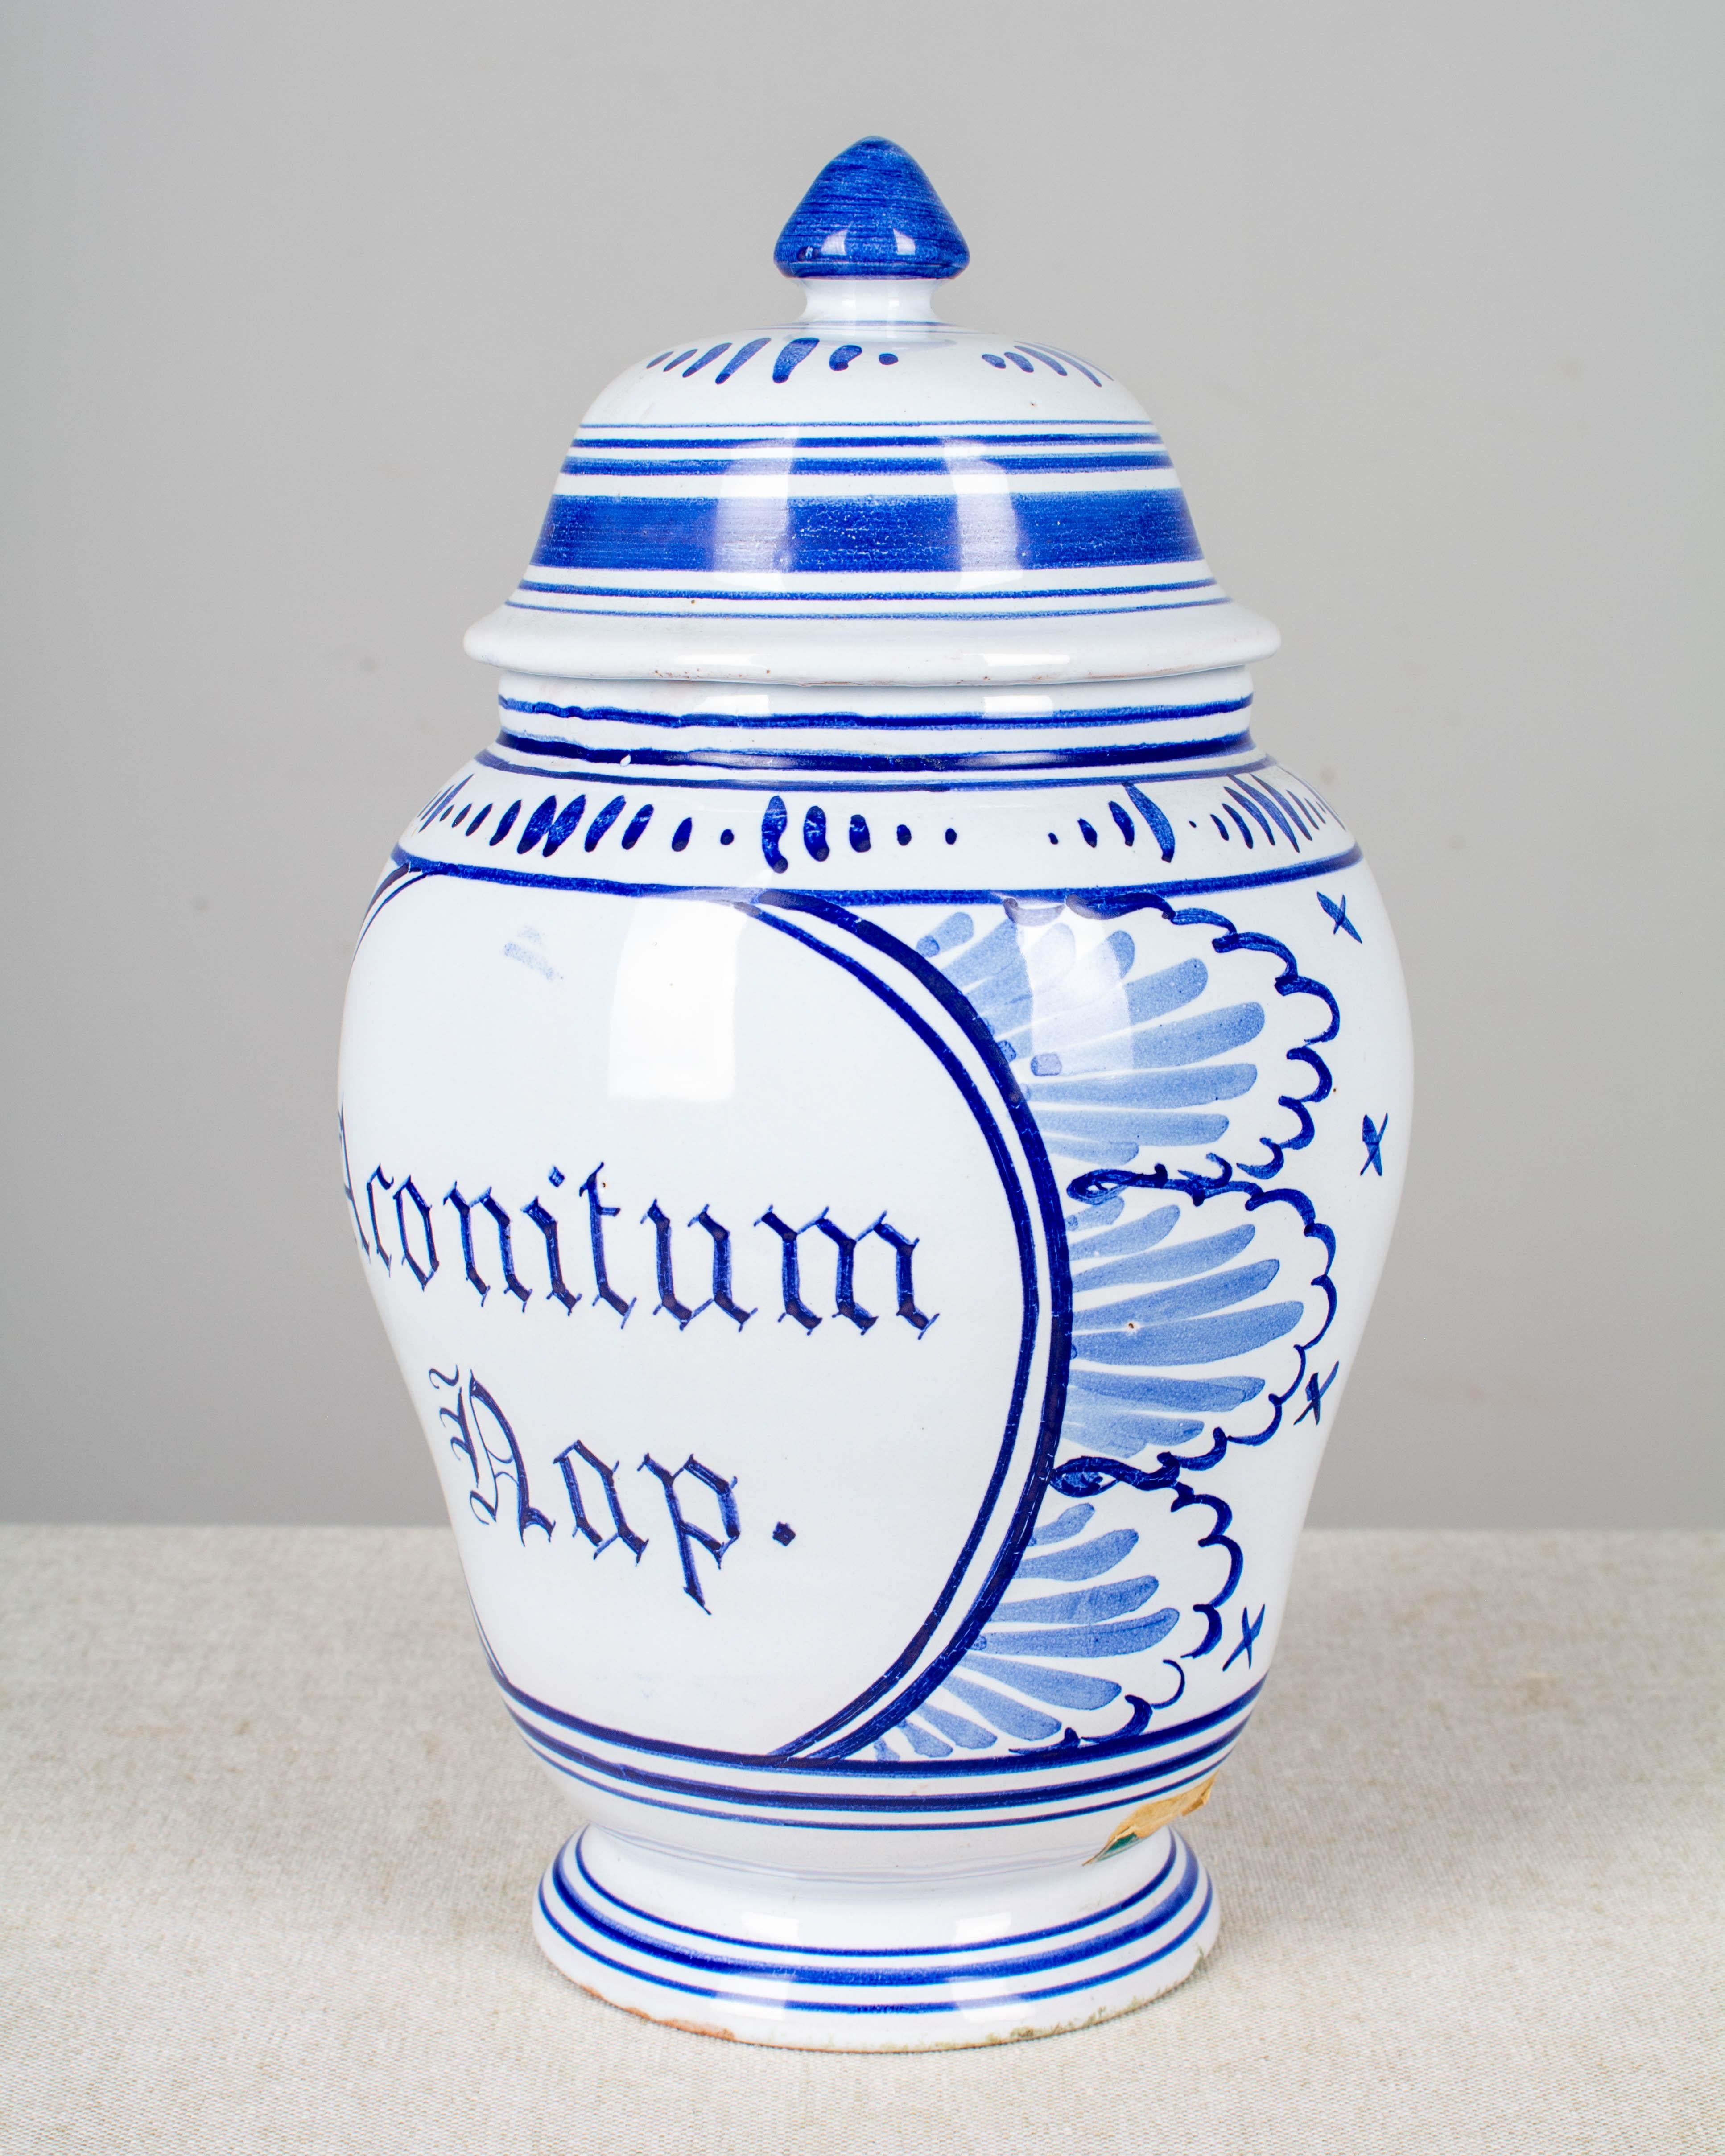 A delft faience apothecary jar with blue hand painted decoration and label: Aconitum Dap. Unmarked. Remnants of green foil label near the base.